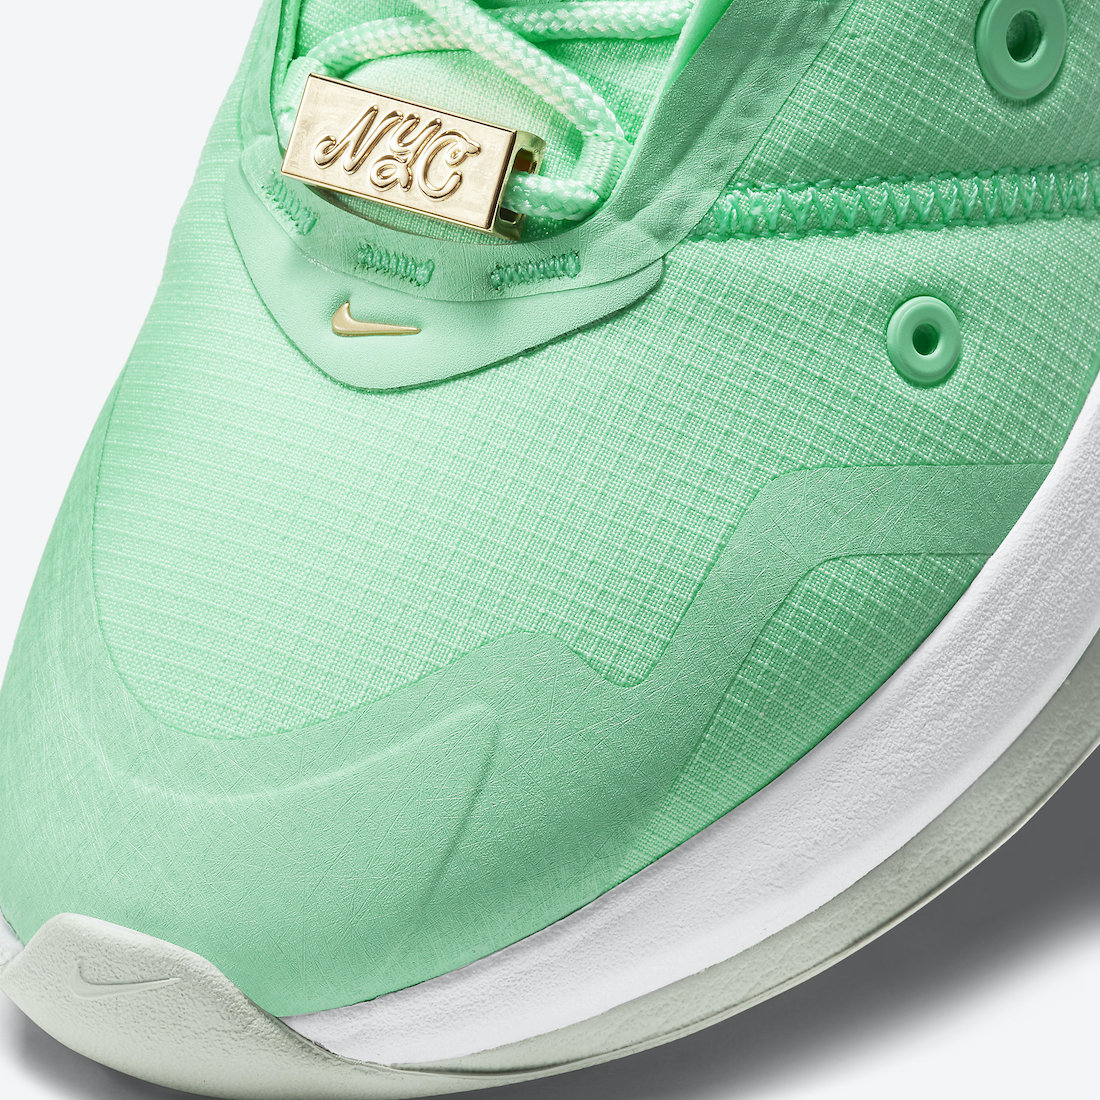 Nike Air Max Up NYC Lady Liberty DH0154-300 Release Date Info